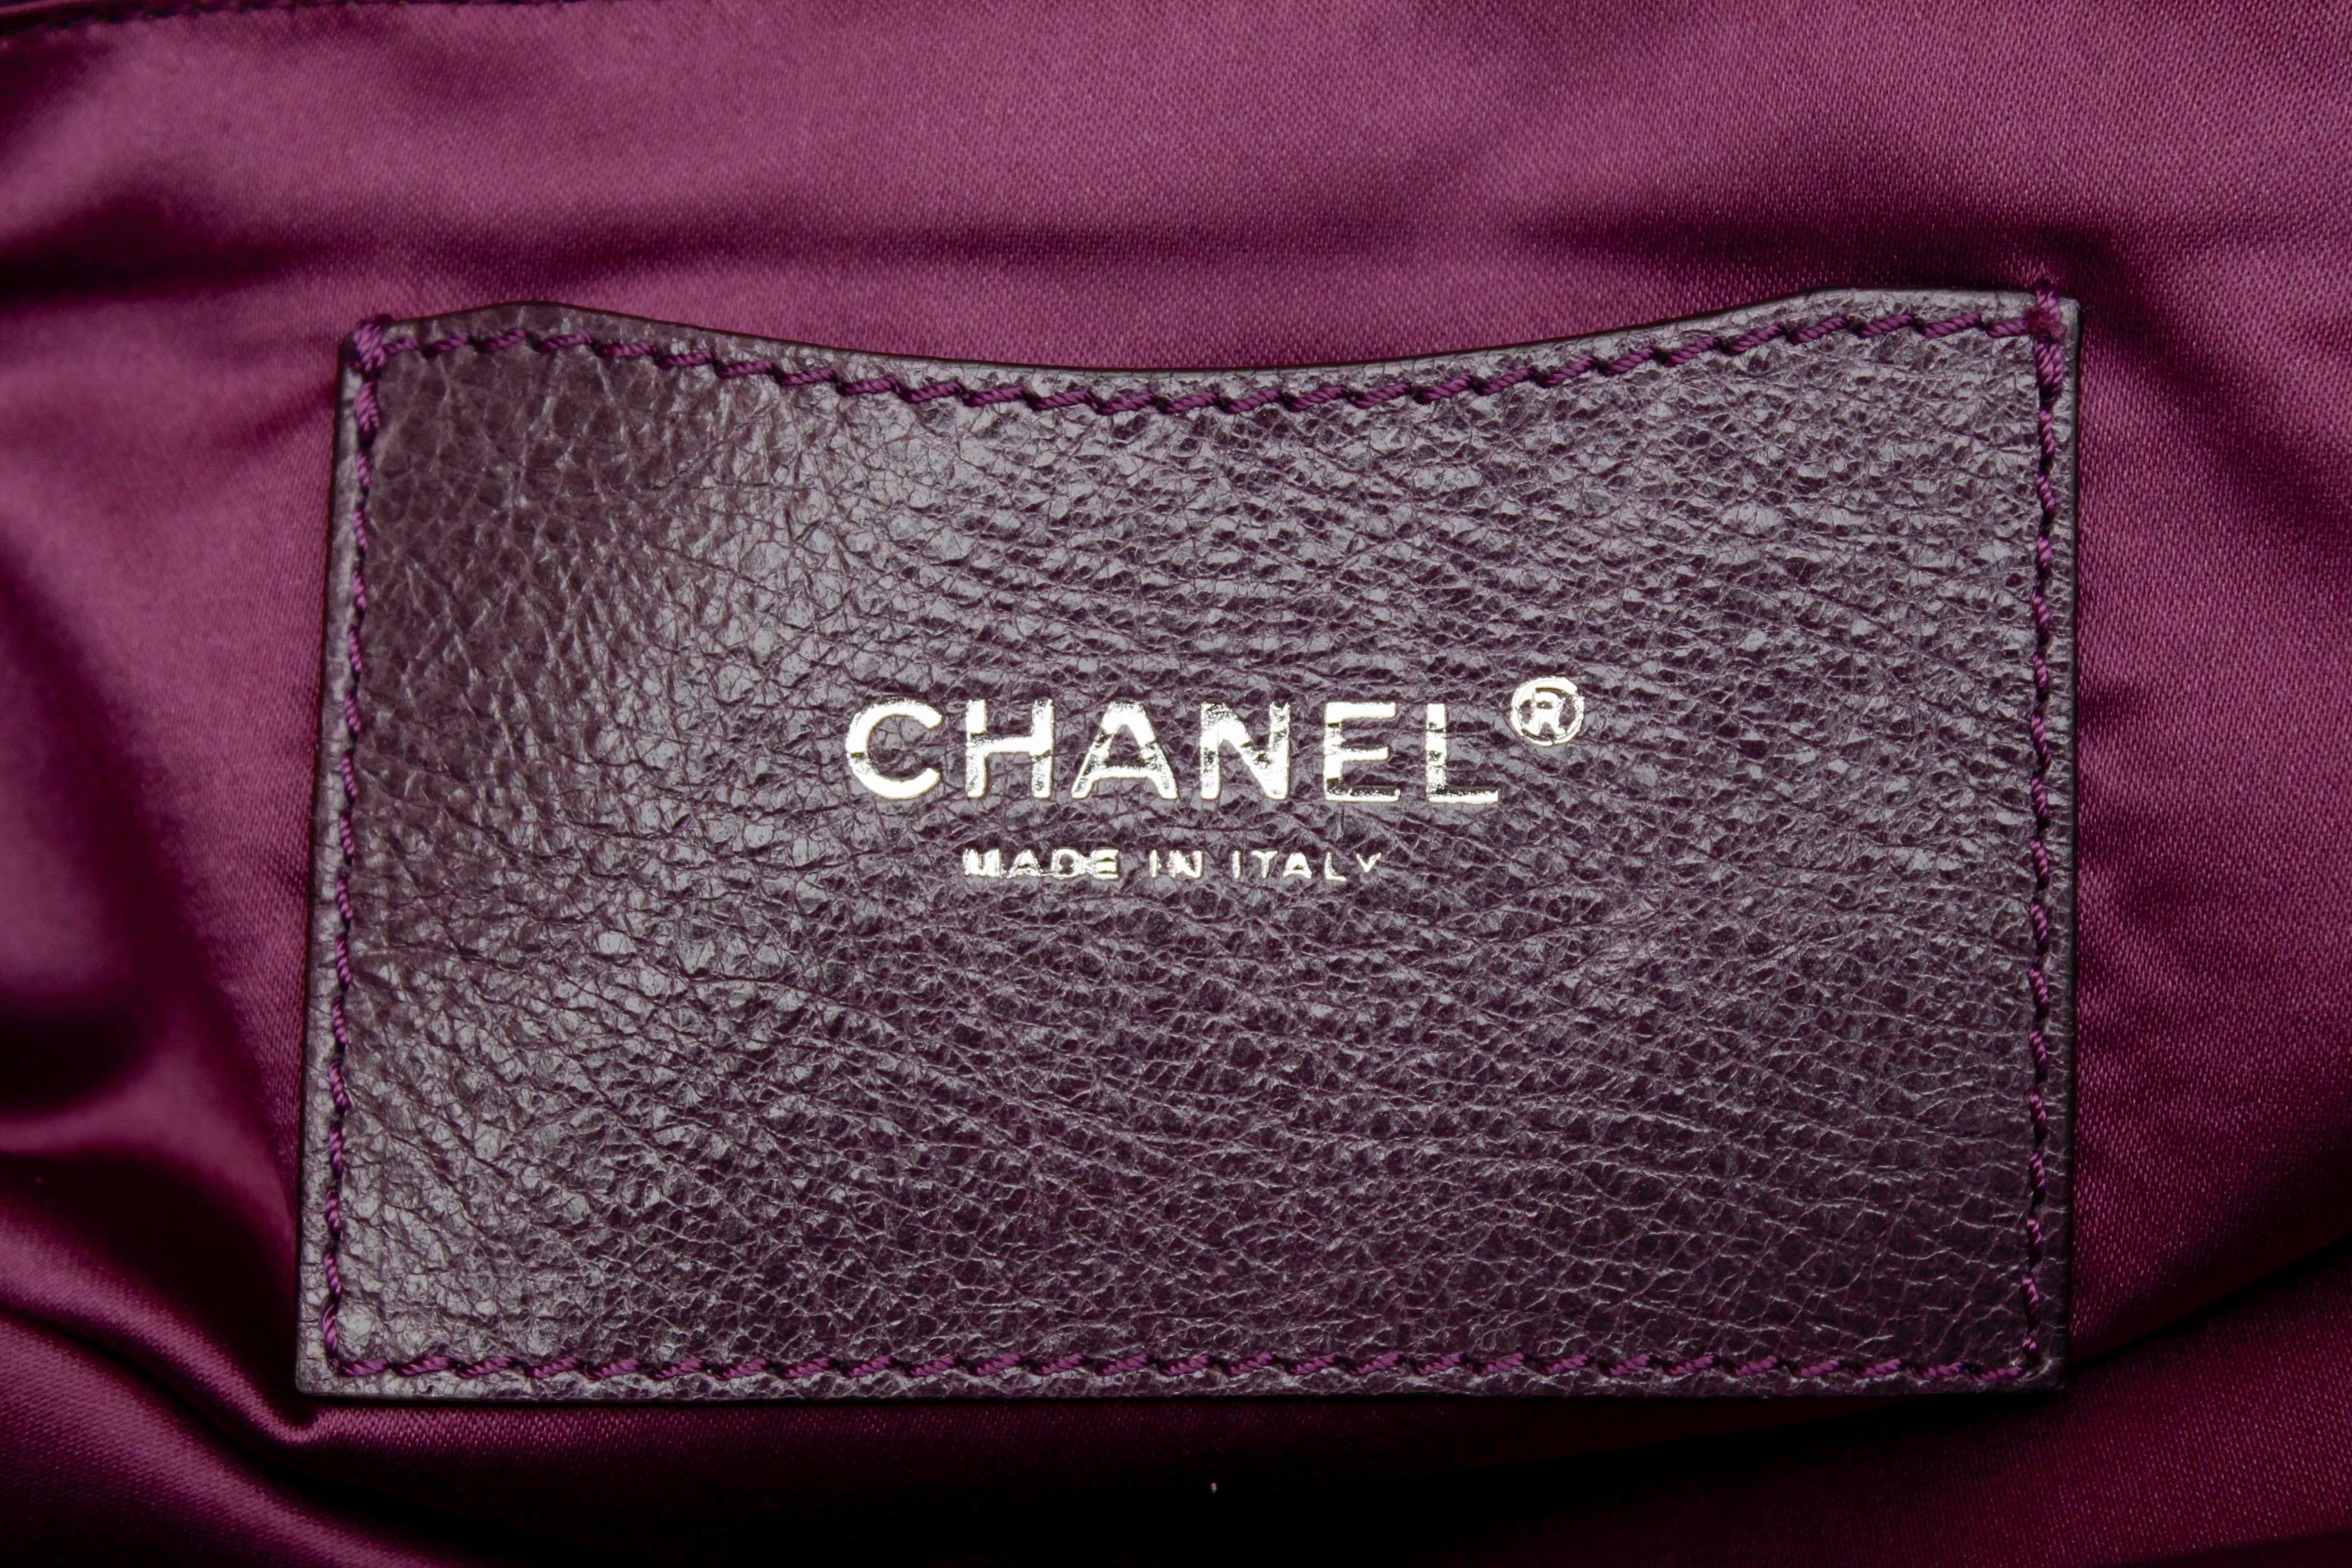 Chanel tote bag in over stitched eggplant leather 8